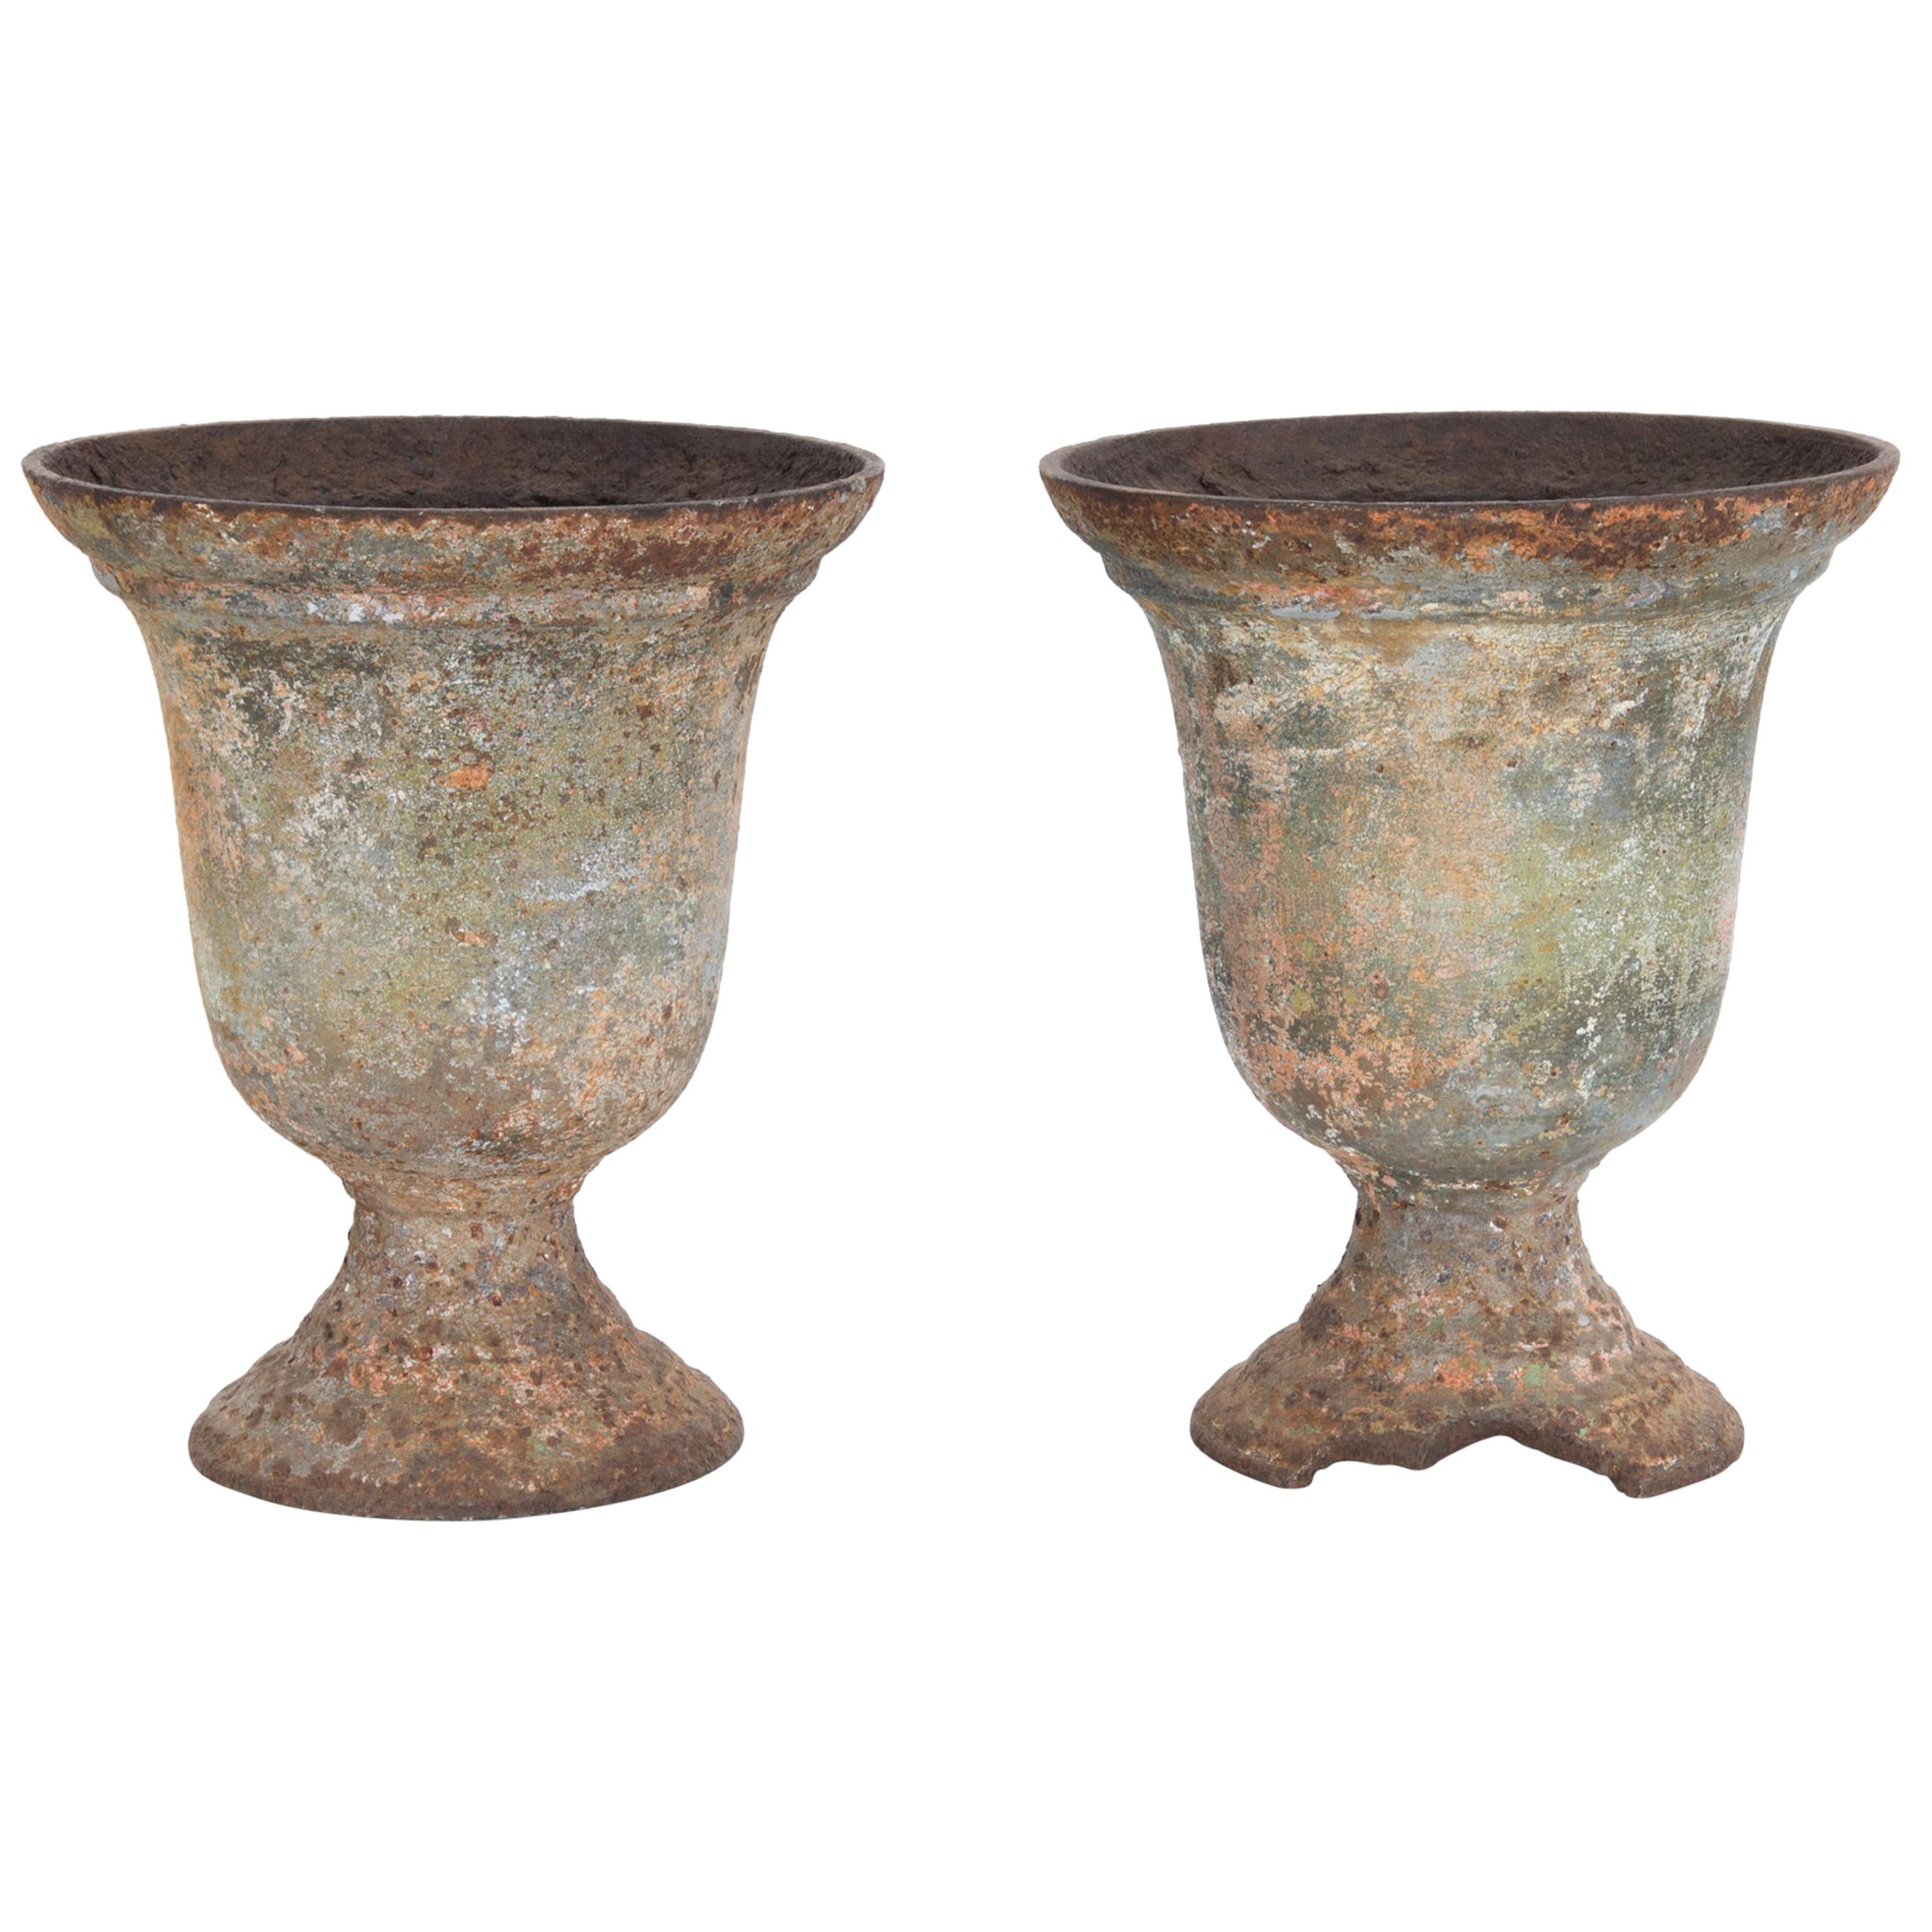 Turn of the Century French Cast Iron Planters, a Pair